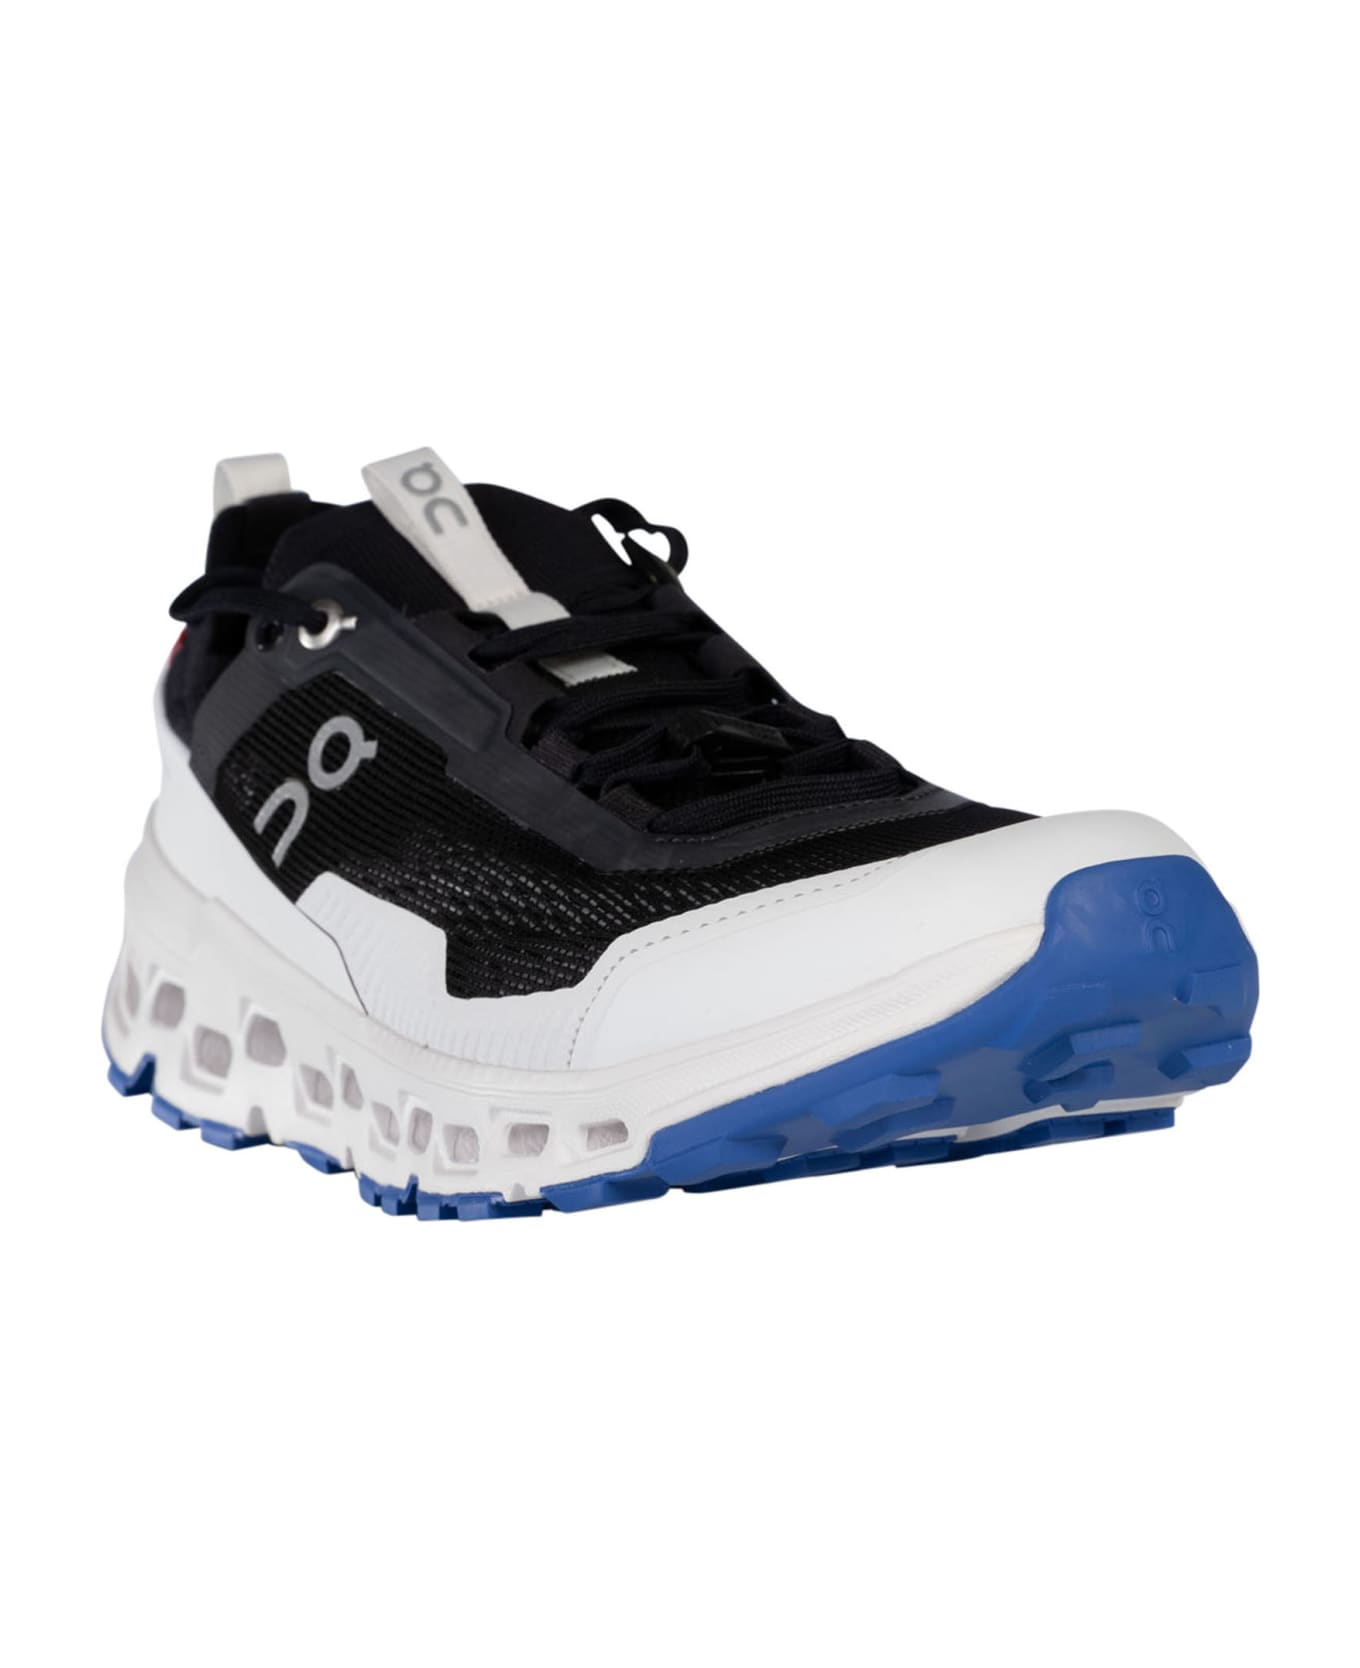 ON Cloudultra2 Sneakers - Black/White